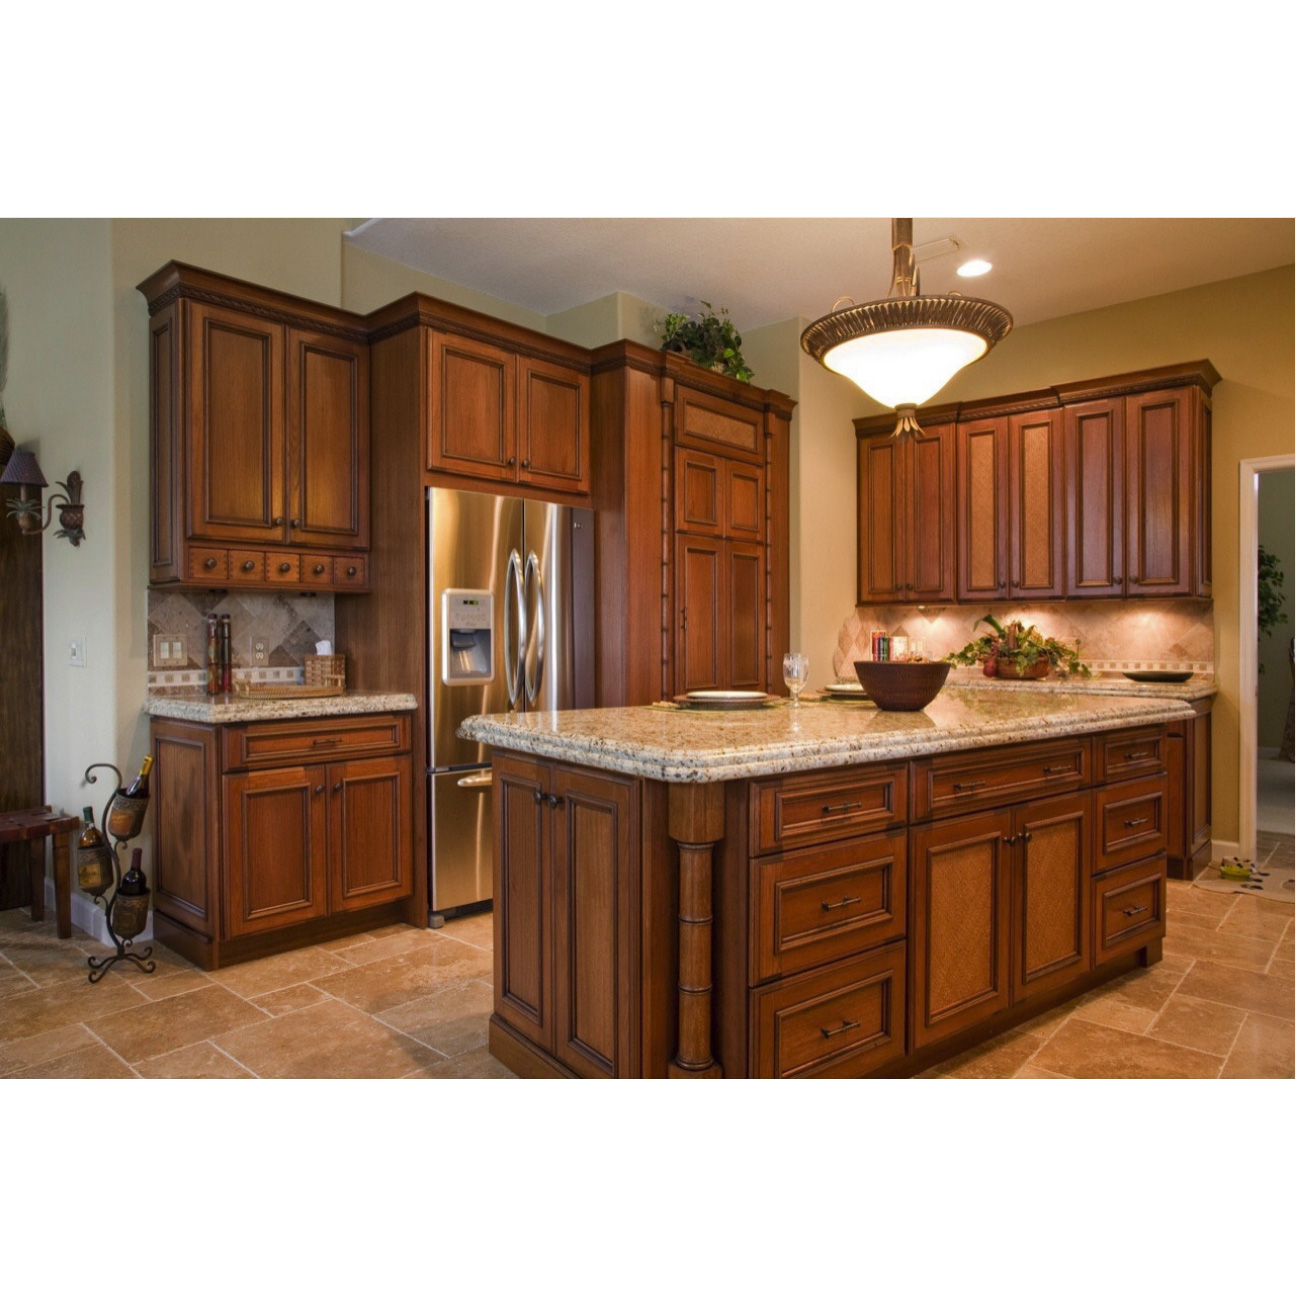 AisDecor reliable solid wood kitchen cabinet supplier-2